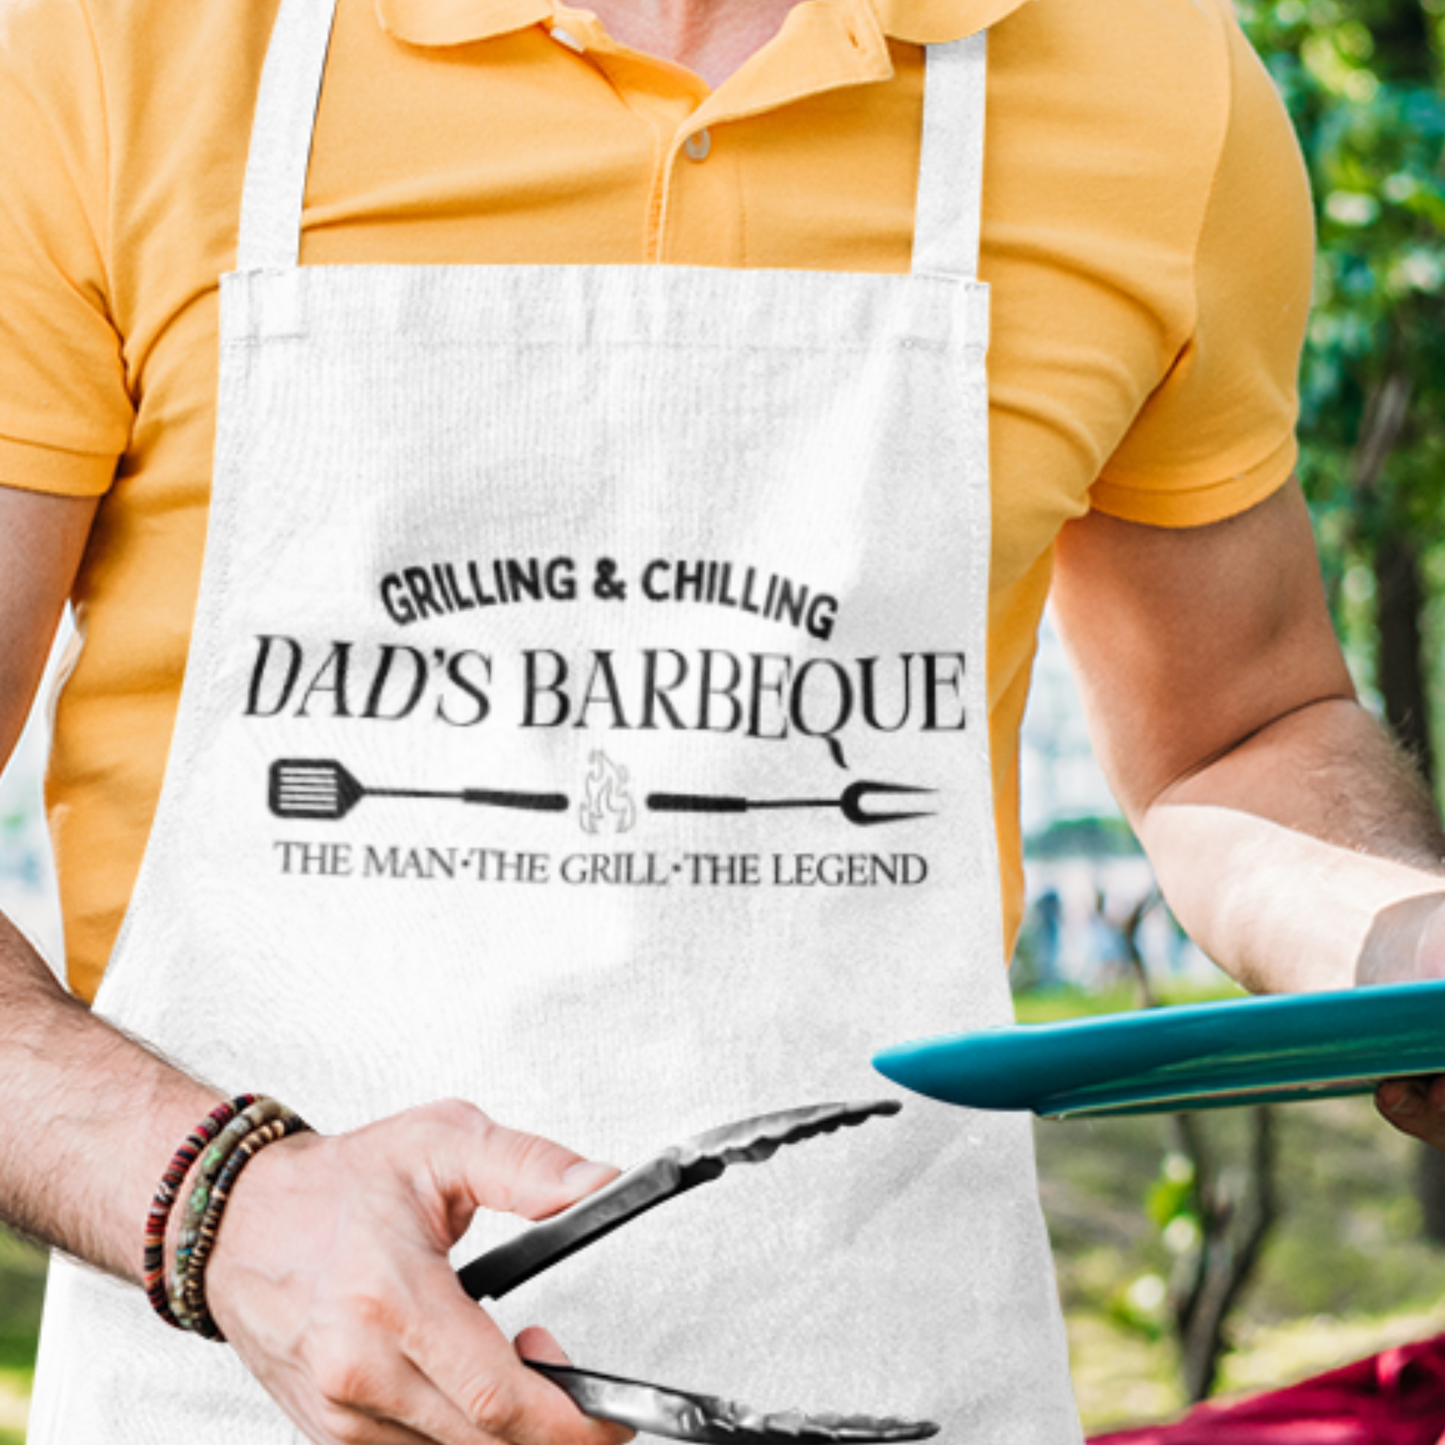 Dad's Barbeque Apron, Father's Day Gift, Grilling Apron, Smoke Apron, Cooking Apron, Dad Birthday Gift, Apron for Men, BBQ Apron